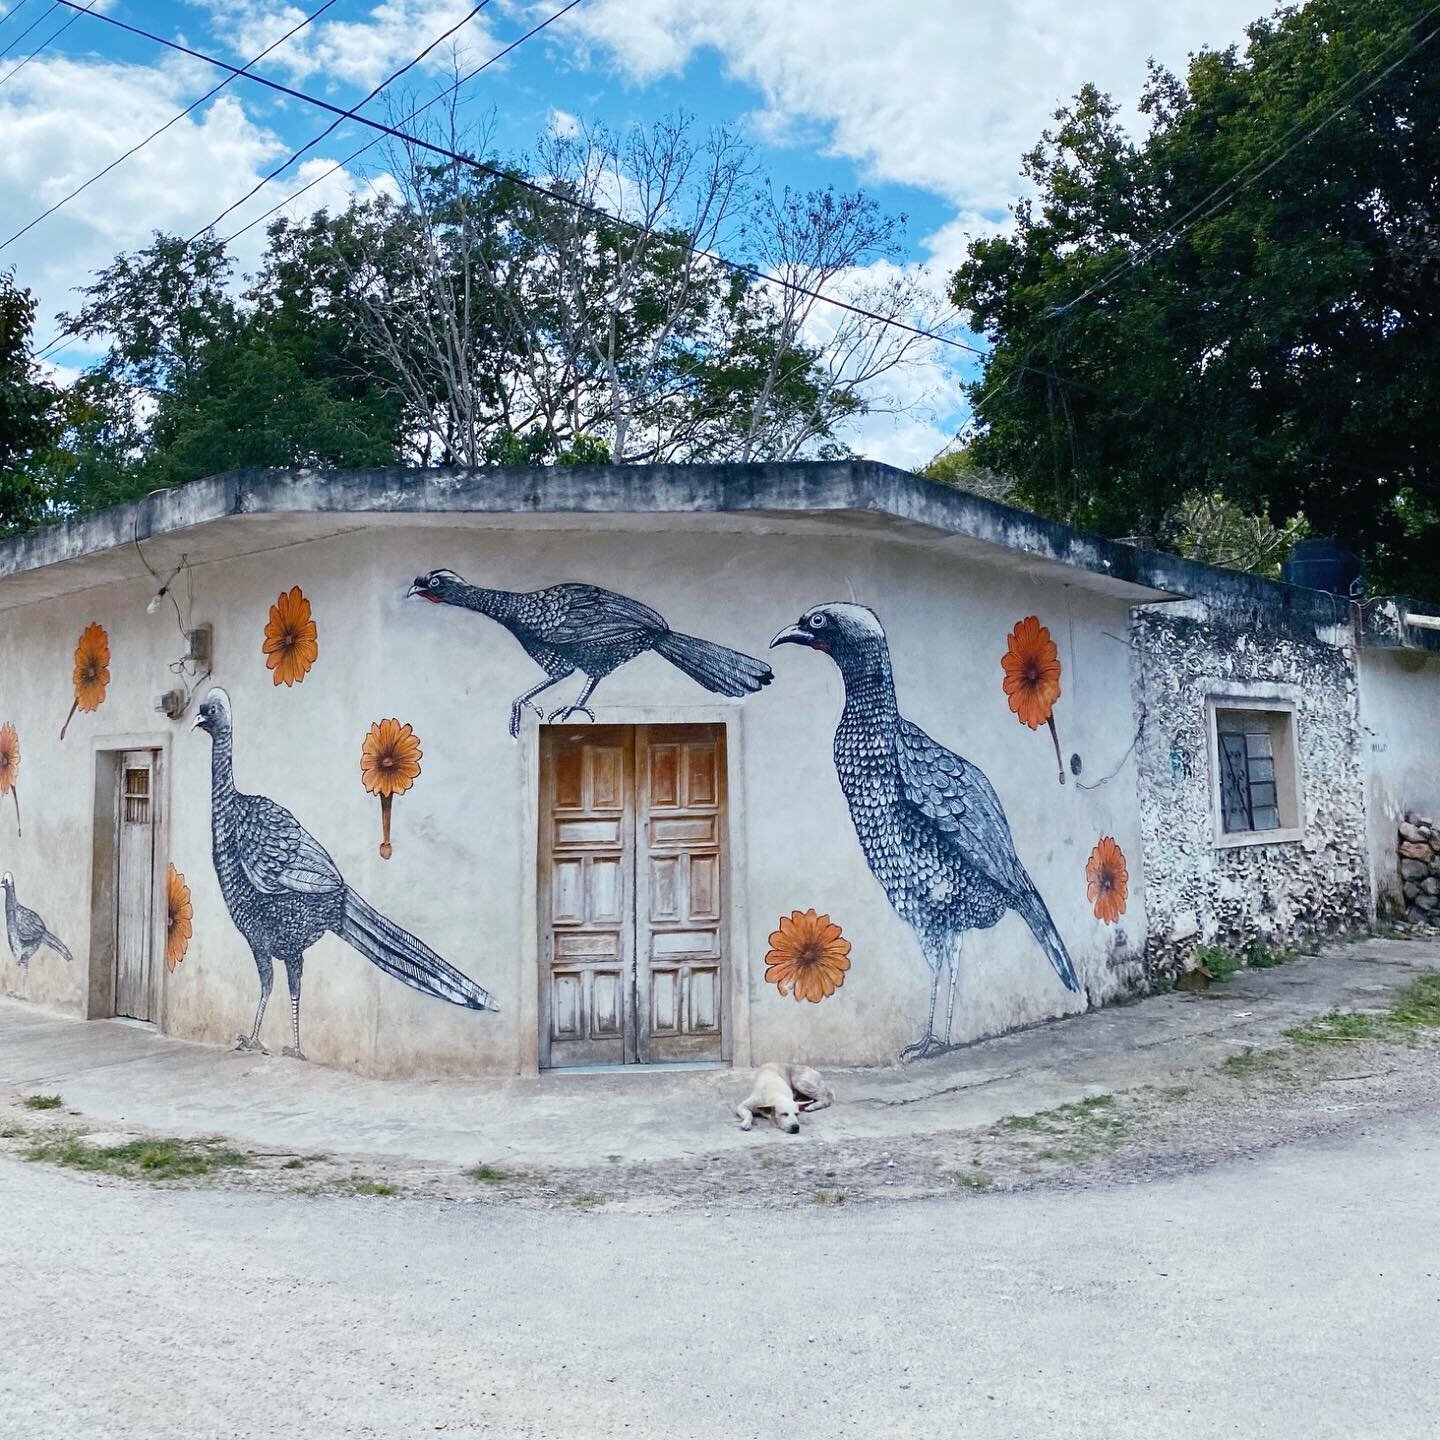 Love the murals in tiny Mayan villages with cute details 🌼 Guess which common bird of the region you can see on the wall painting?
.
1️⃣ Great-tailed Grackle
2️⃣ Plain Chachalaca 
3️⃣ Occelated Turkey
.
Comment your guess below ⬇️